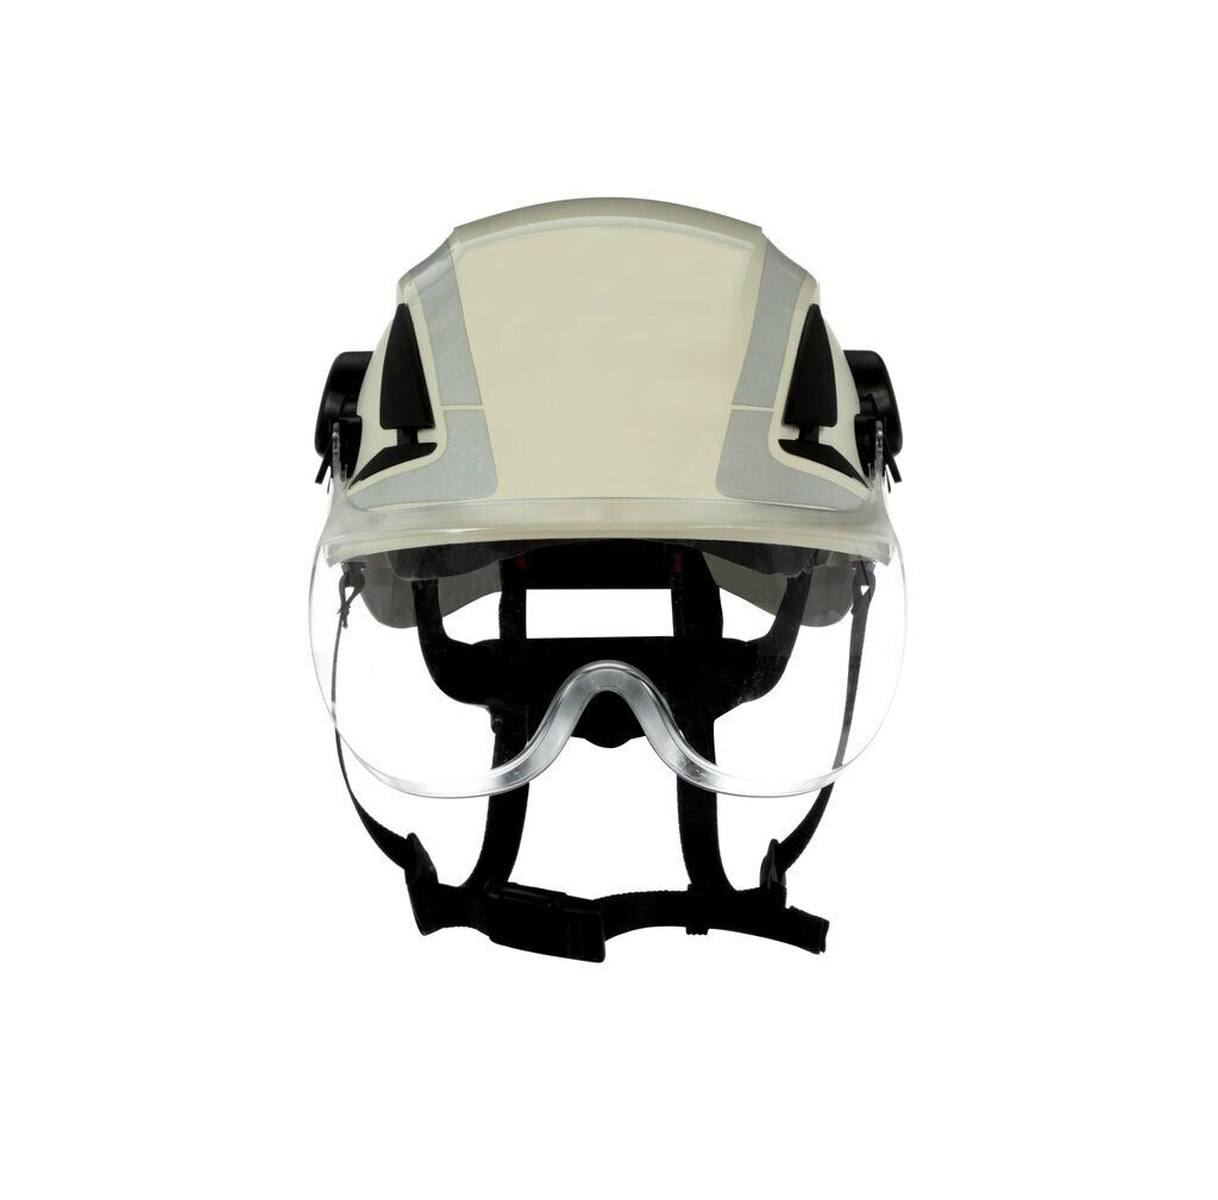 3M short visor X5-SV01-CE for safety helmets X5000 and X5500, transparent, anti-fog and anti-scratch coating, polycarbonate